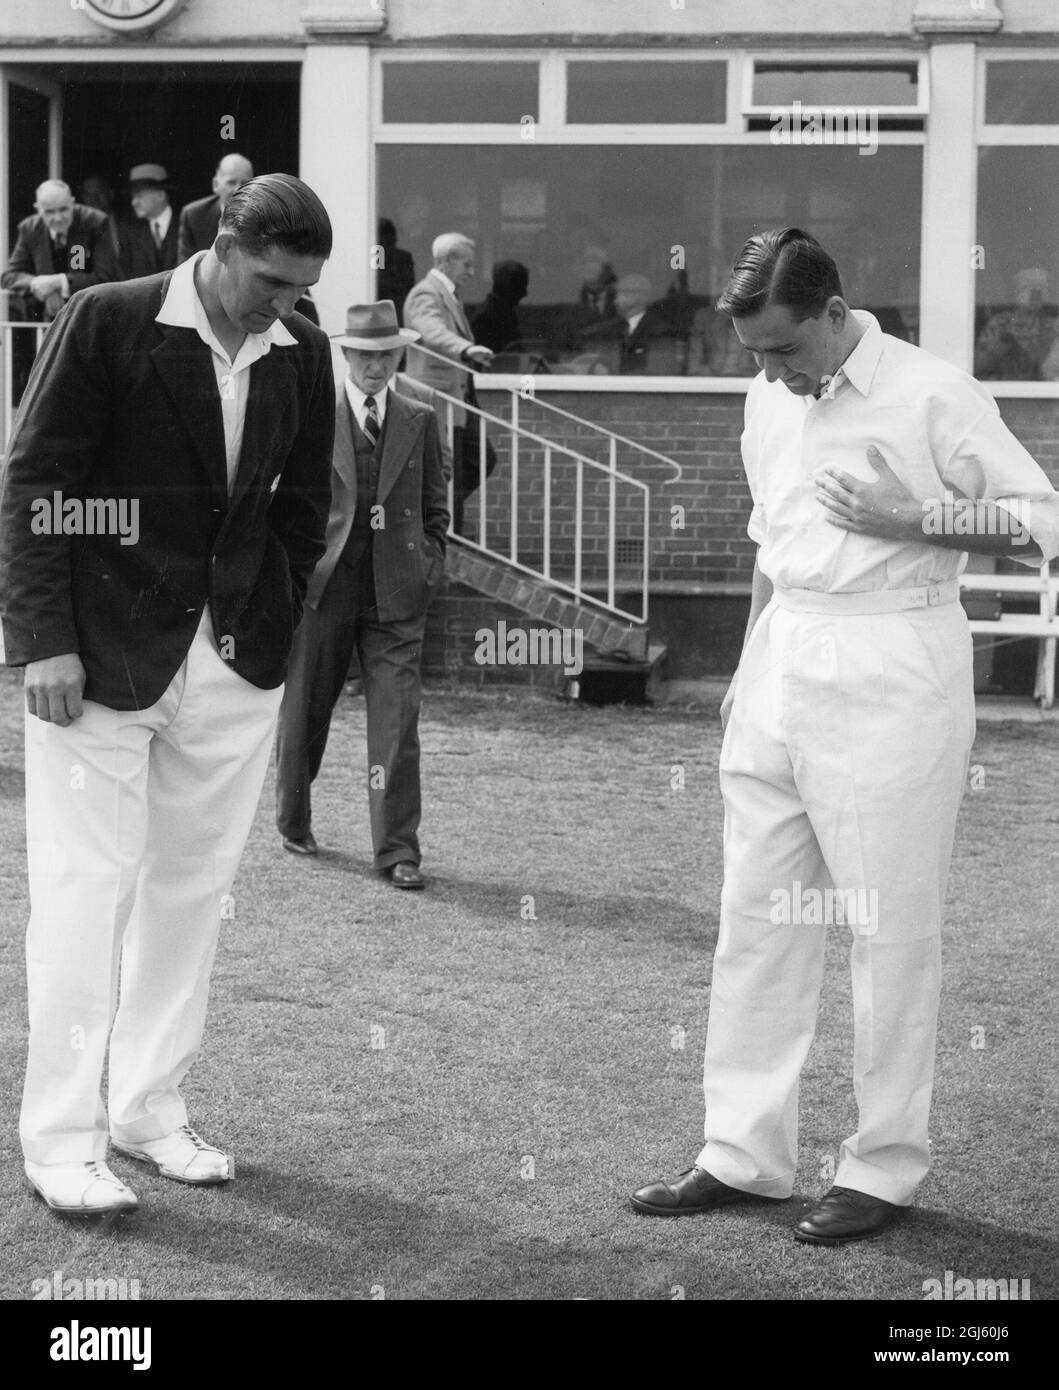 Yorkshire Captain J V Wilson and Kent Cricket Captain Colin Cowdrey (right) toss the coin before start of game 25 May 1960 Stock Photo